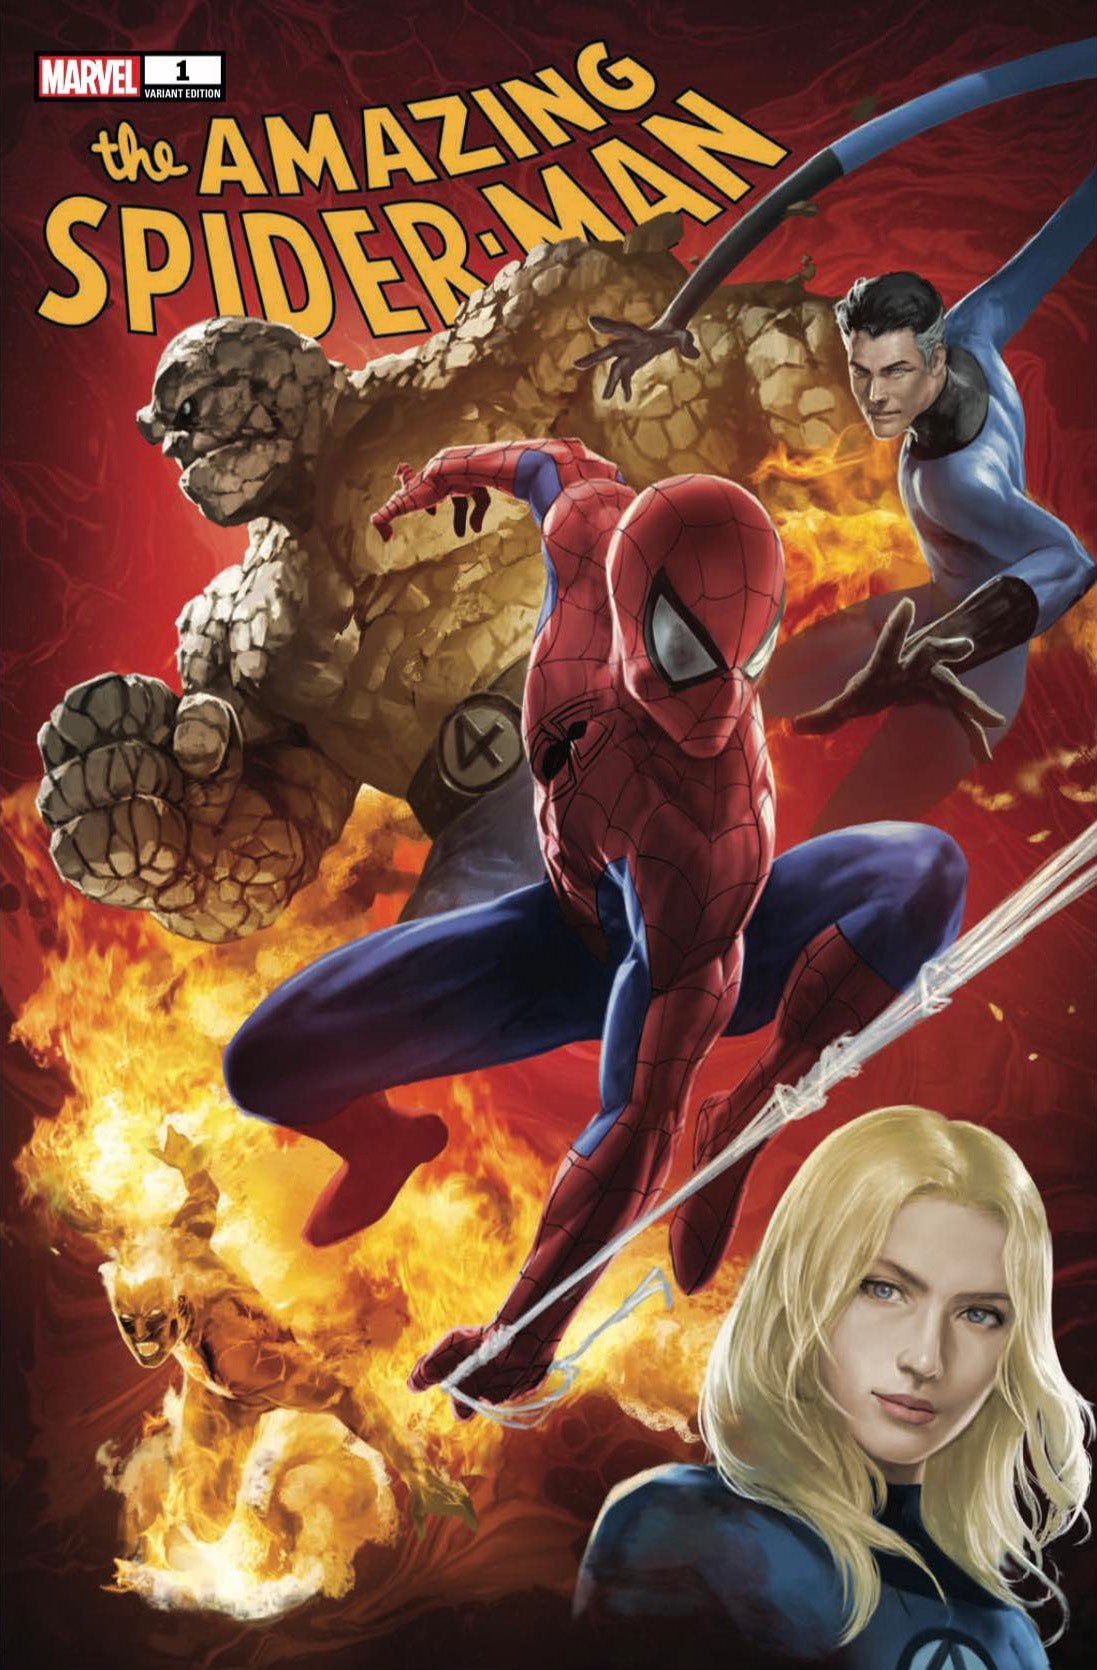 The Amazing Spider-Man #1 Reviews